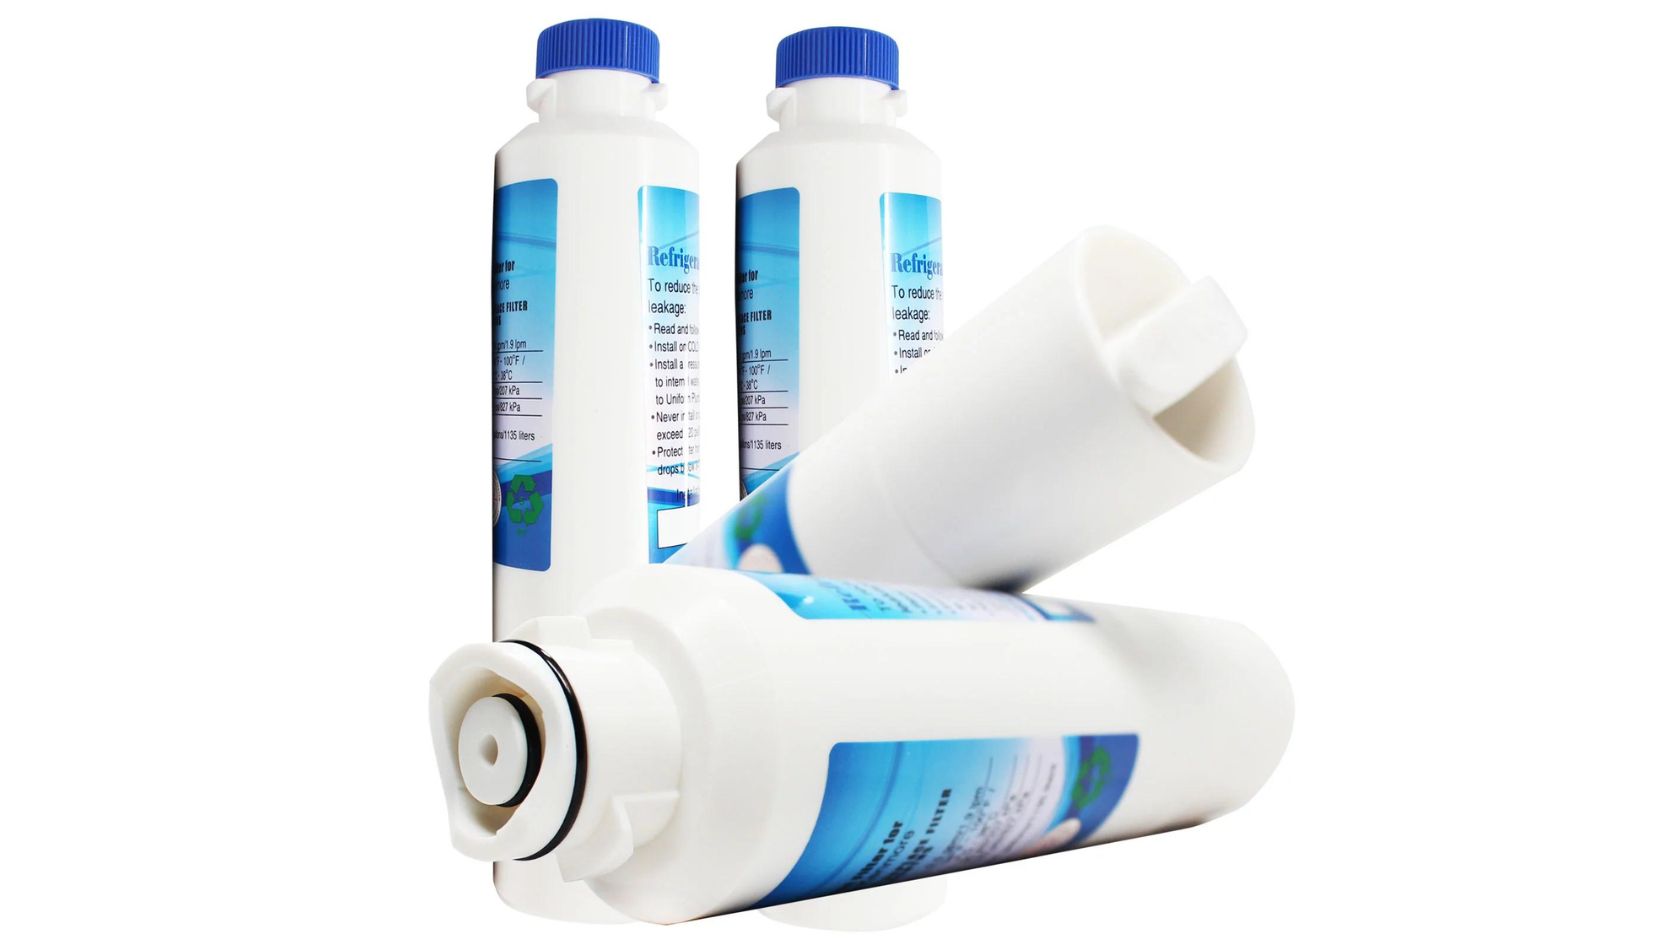 8 Amazing Samsung Refrigerator Water Filter Replacement Da29-00020B for 2023